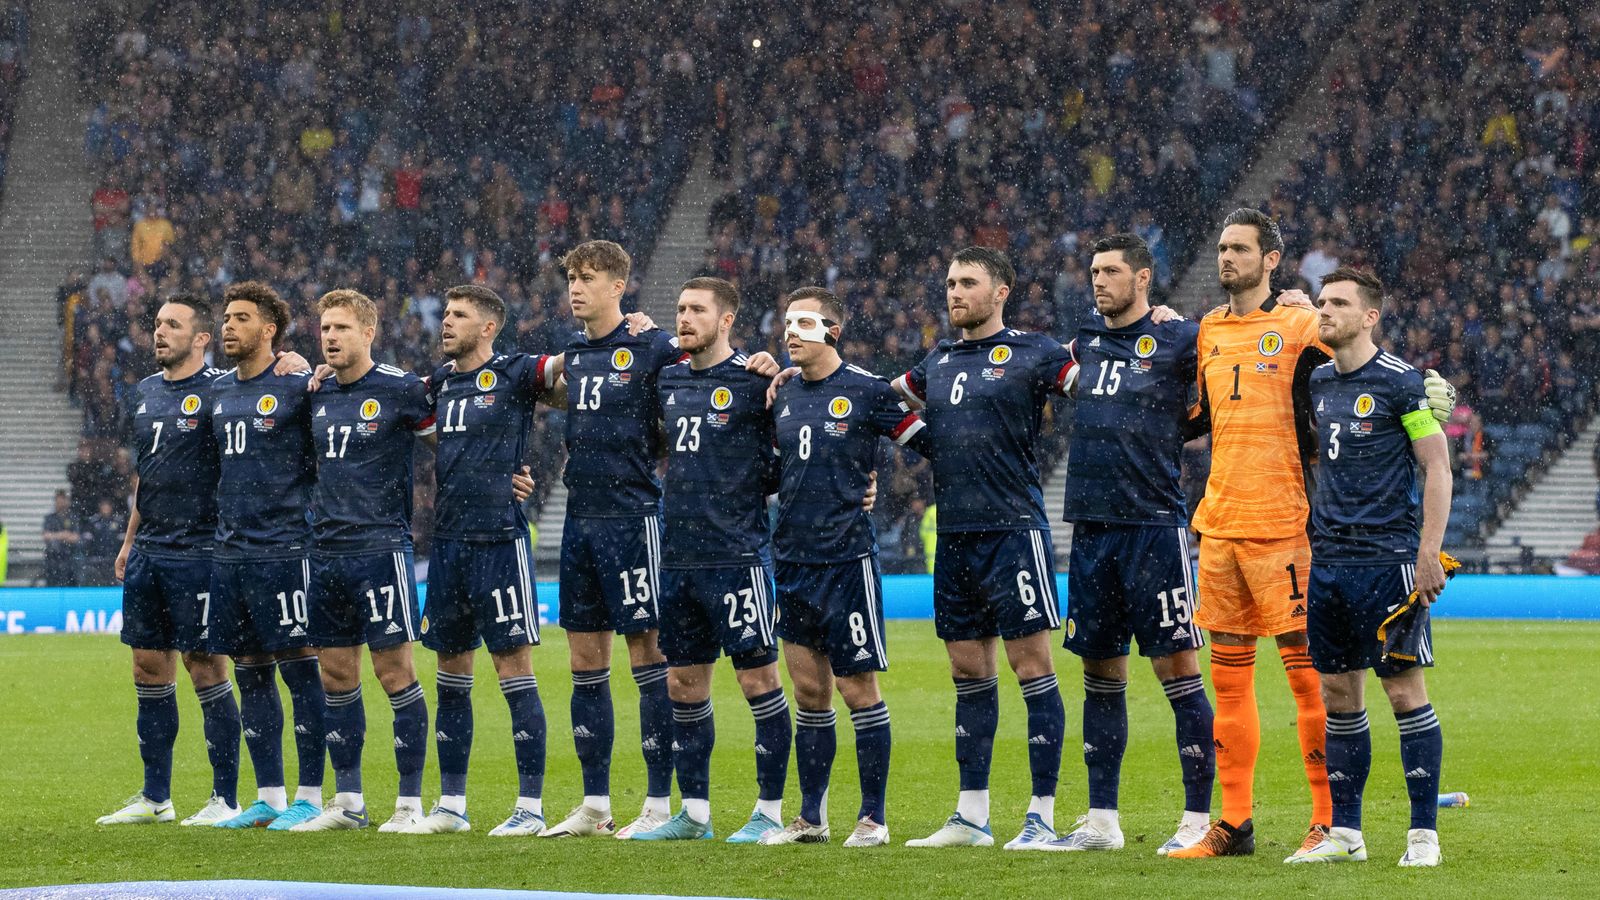 Nations League: Can Scotland build new momentum?